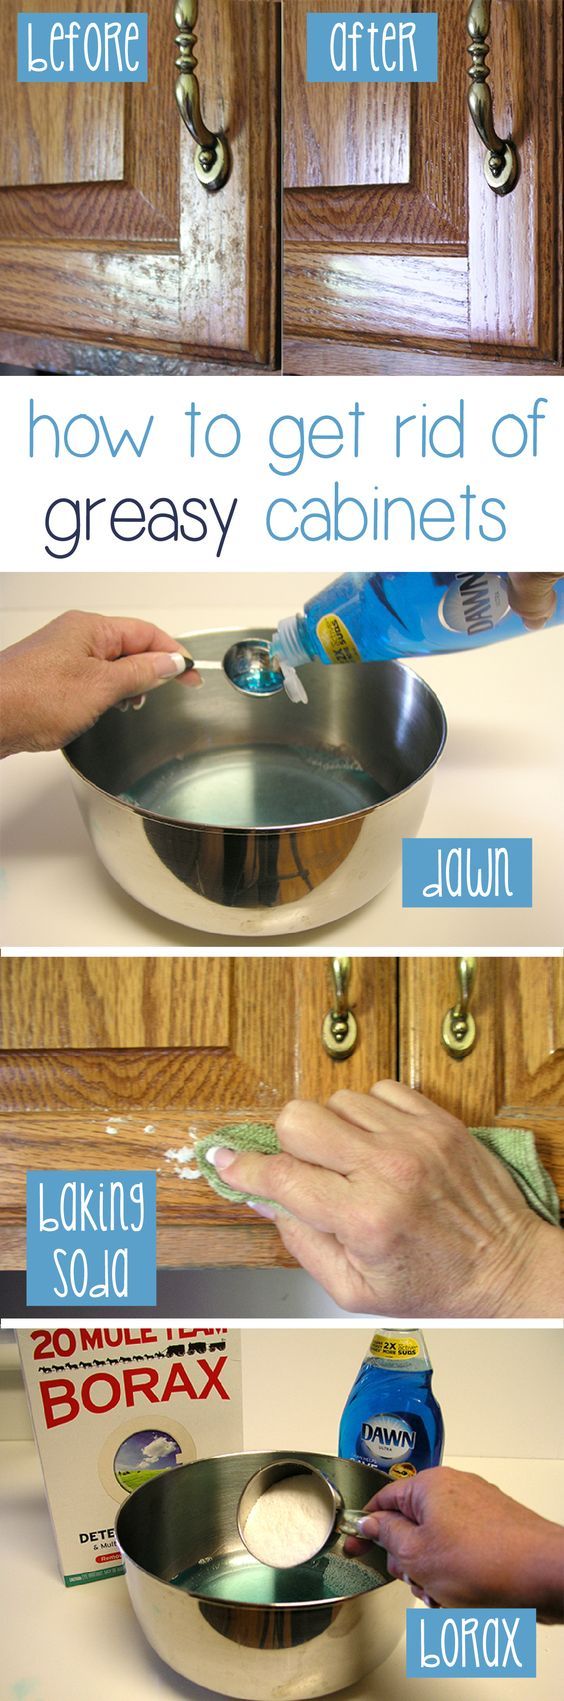 Clean Grease From Kitchen Cabinet Doors Easily. 